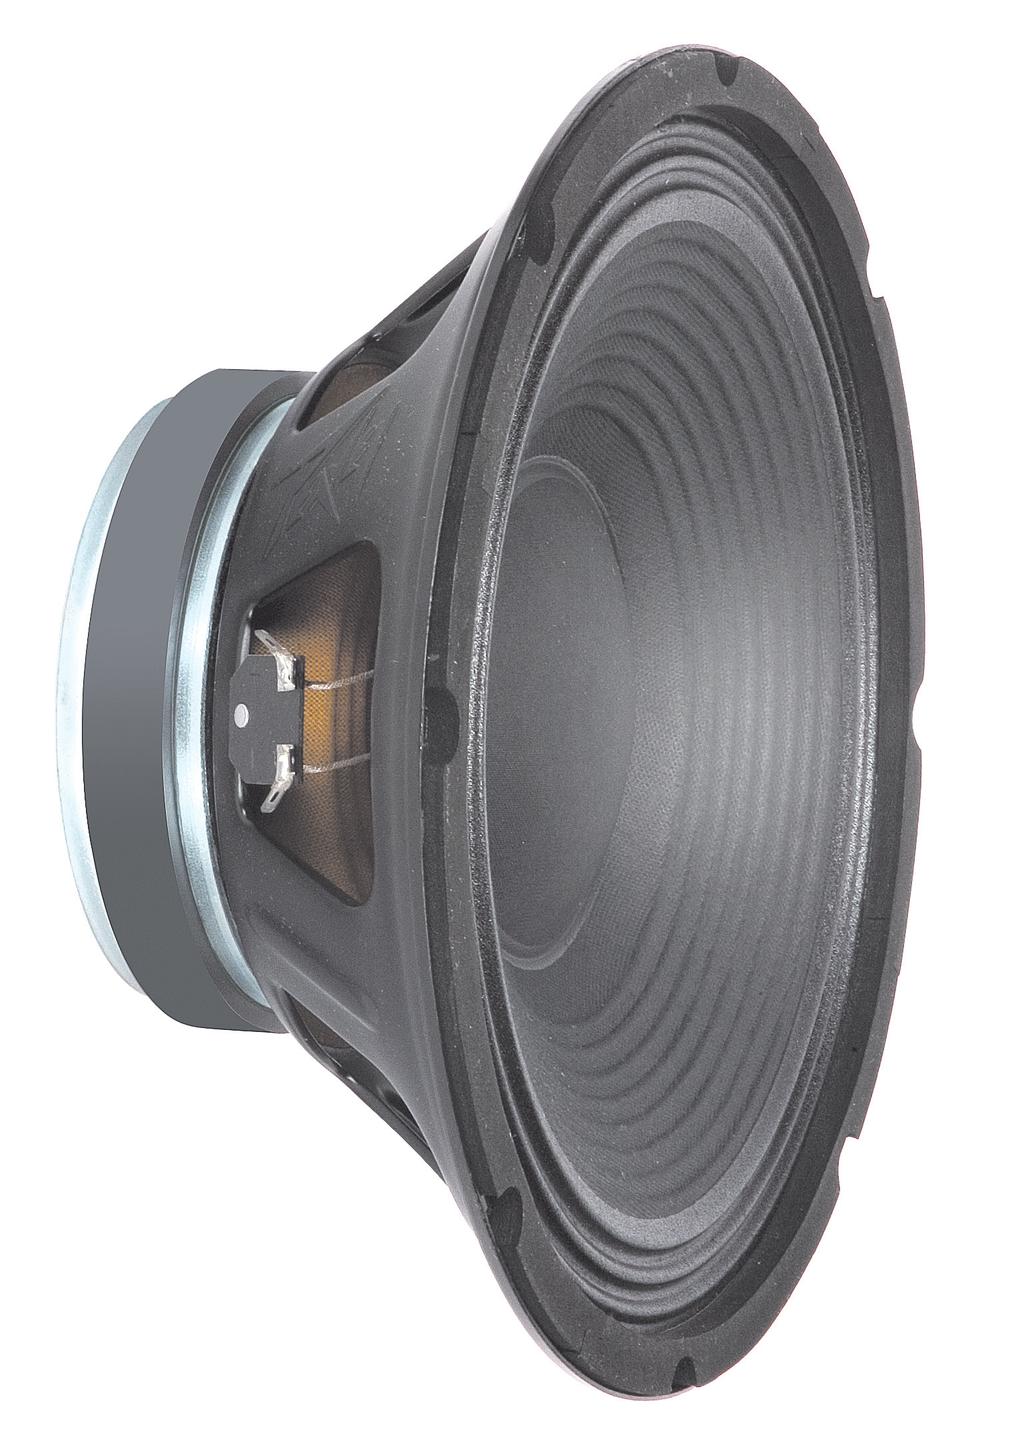 P E A V E Y E L E C T R O N I C S Sheffield Pro Series Sheffield Pro 1200+ 00577900 Sheffield Pro 1500+ 00577910 The Pro 1200+ and Pro 1500+ drivers are high quality, high efficieny woofers.